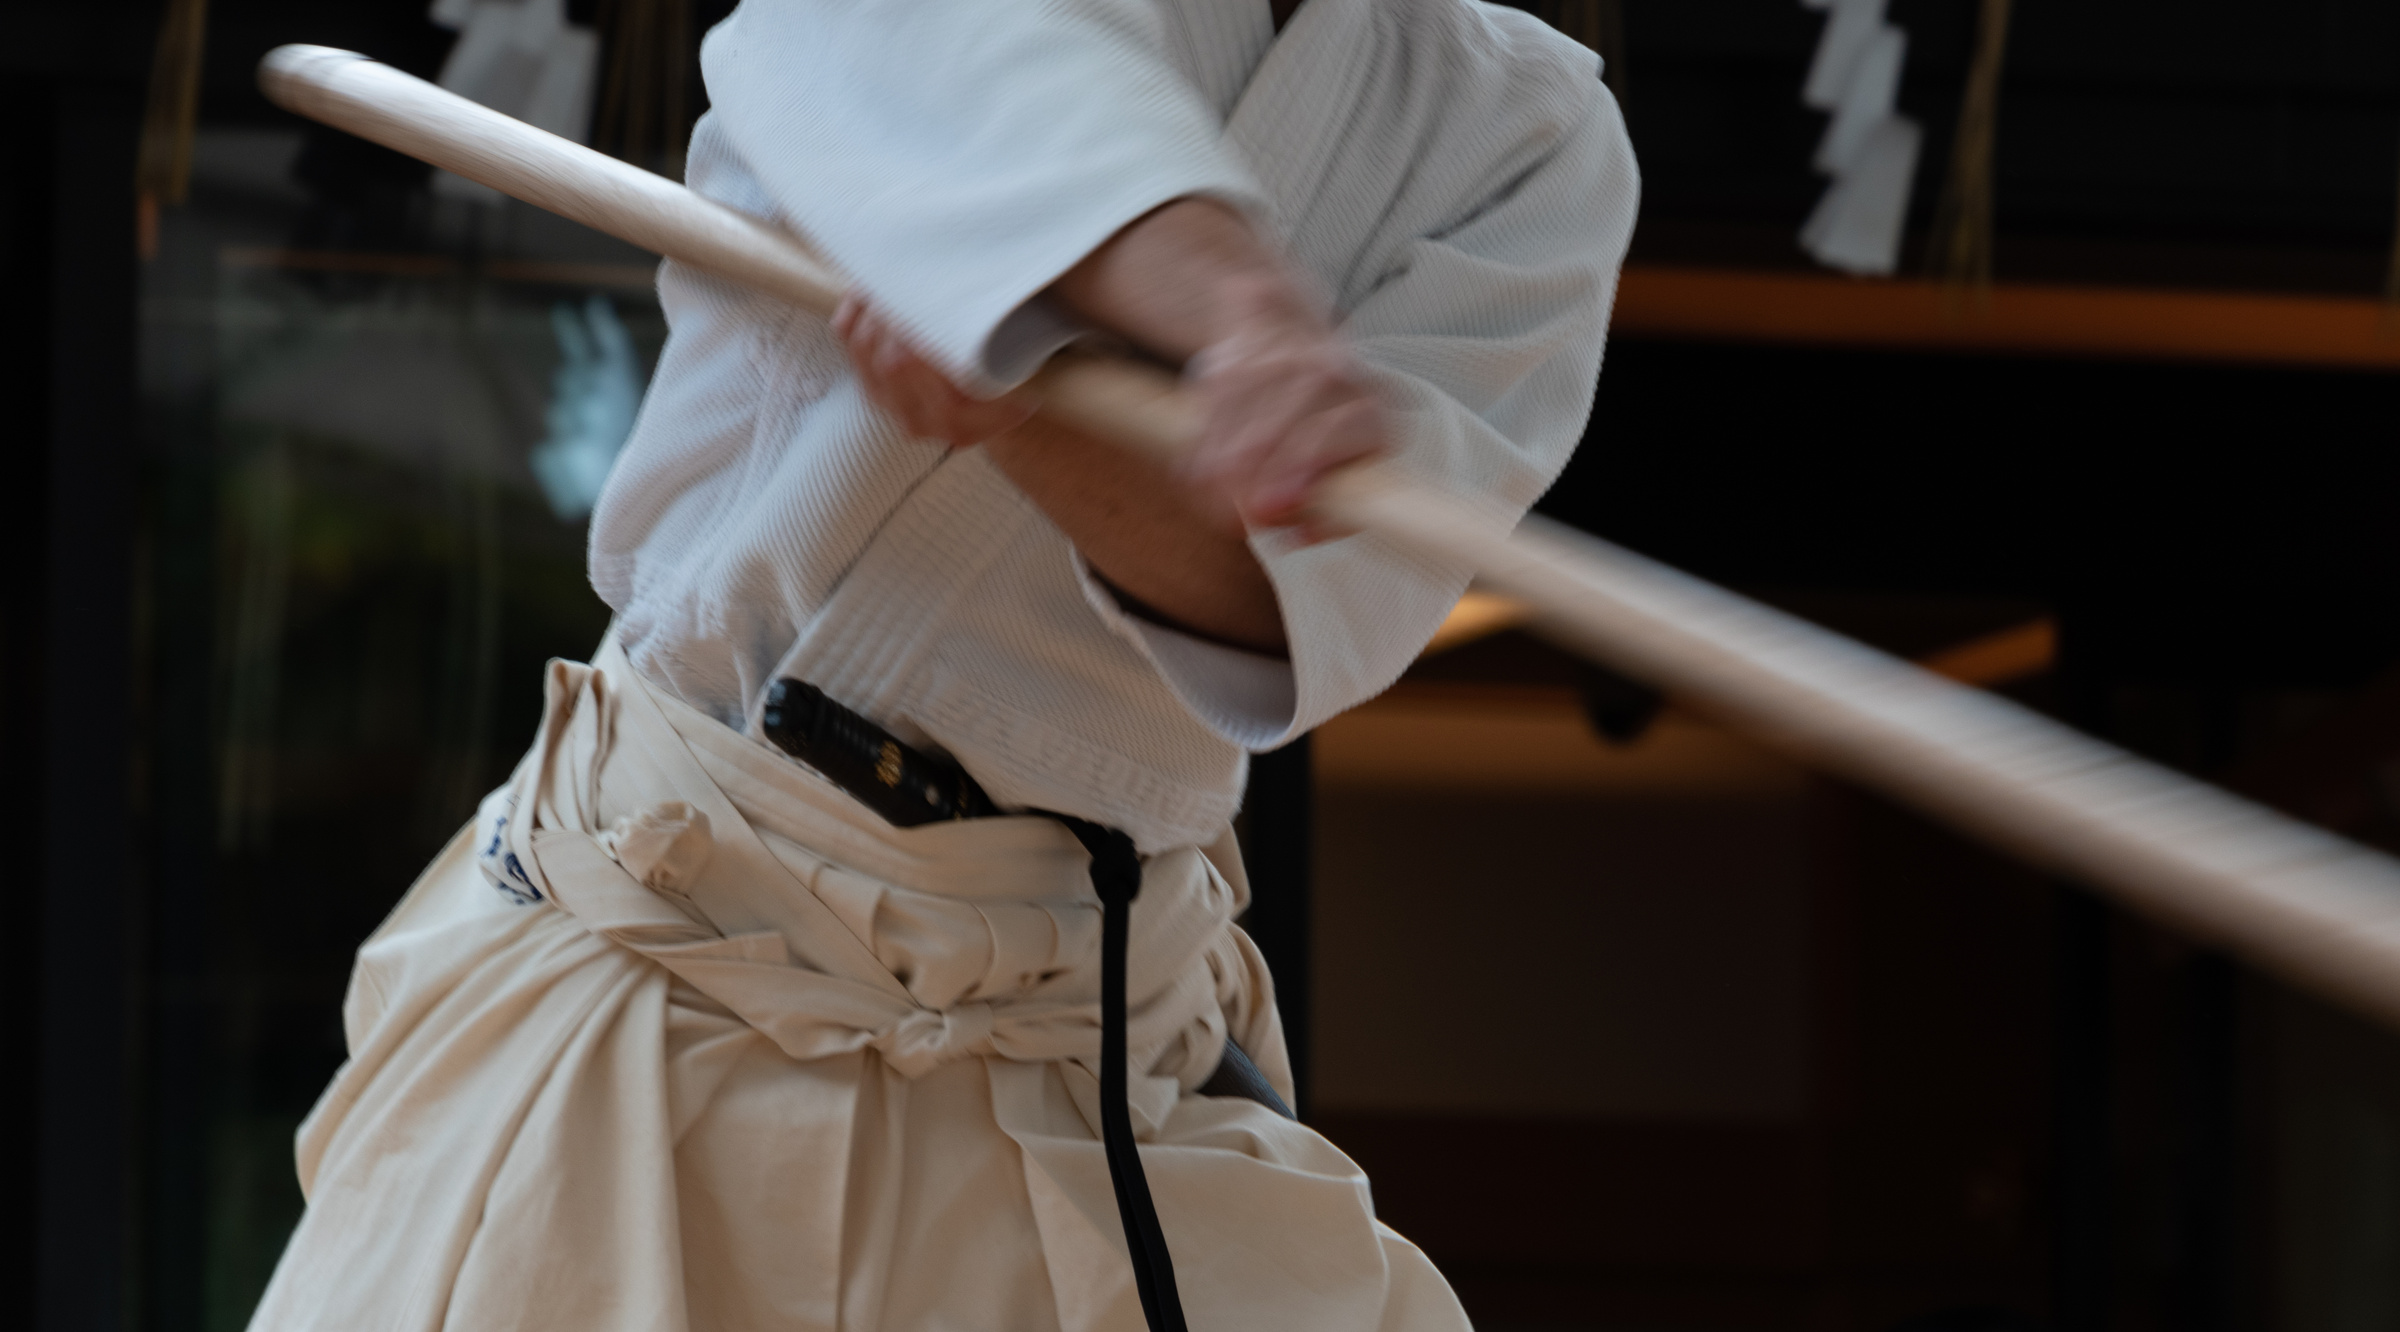 Demonstration of Japanese martial arts